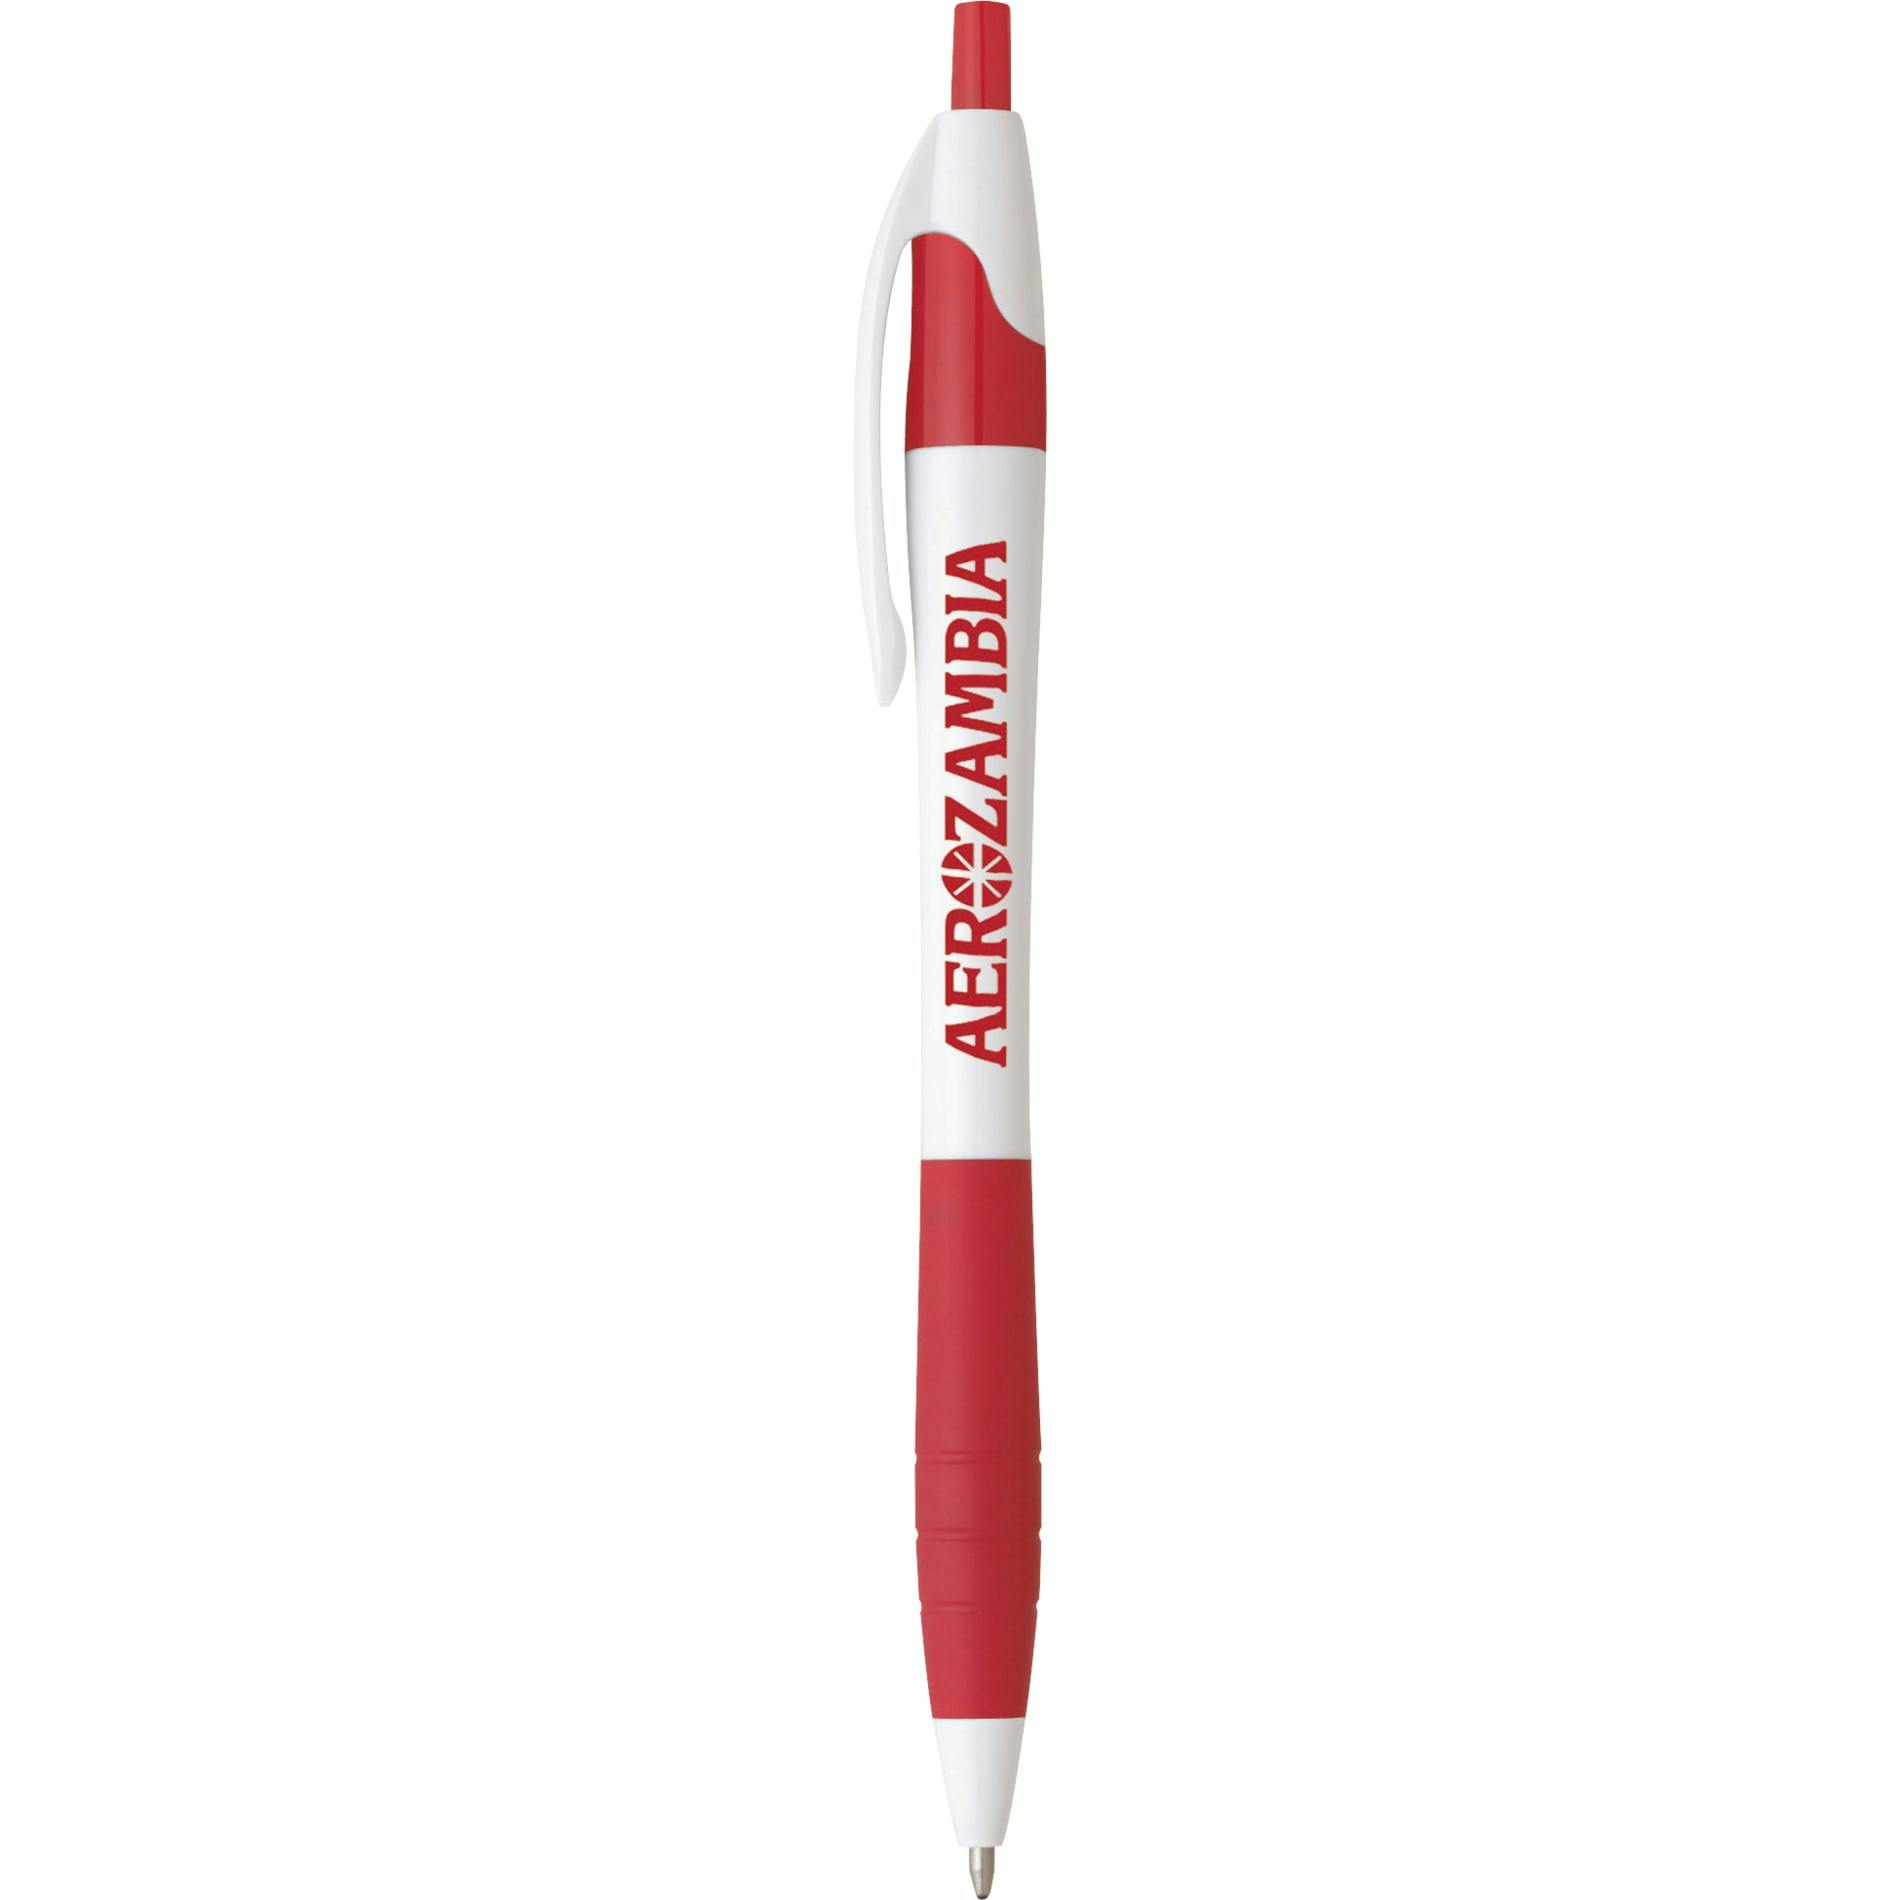 Cougar Rubber Grip Ballpoint Pen - additional Image 2